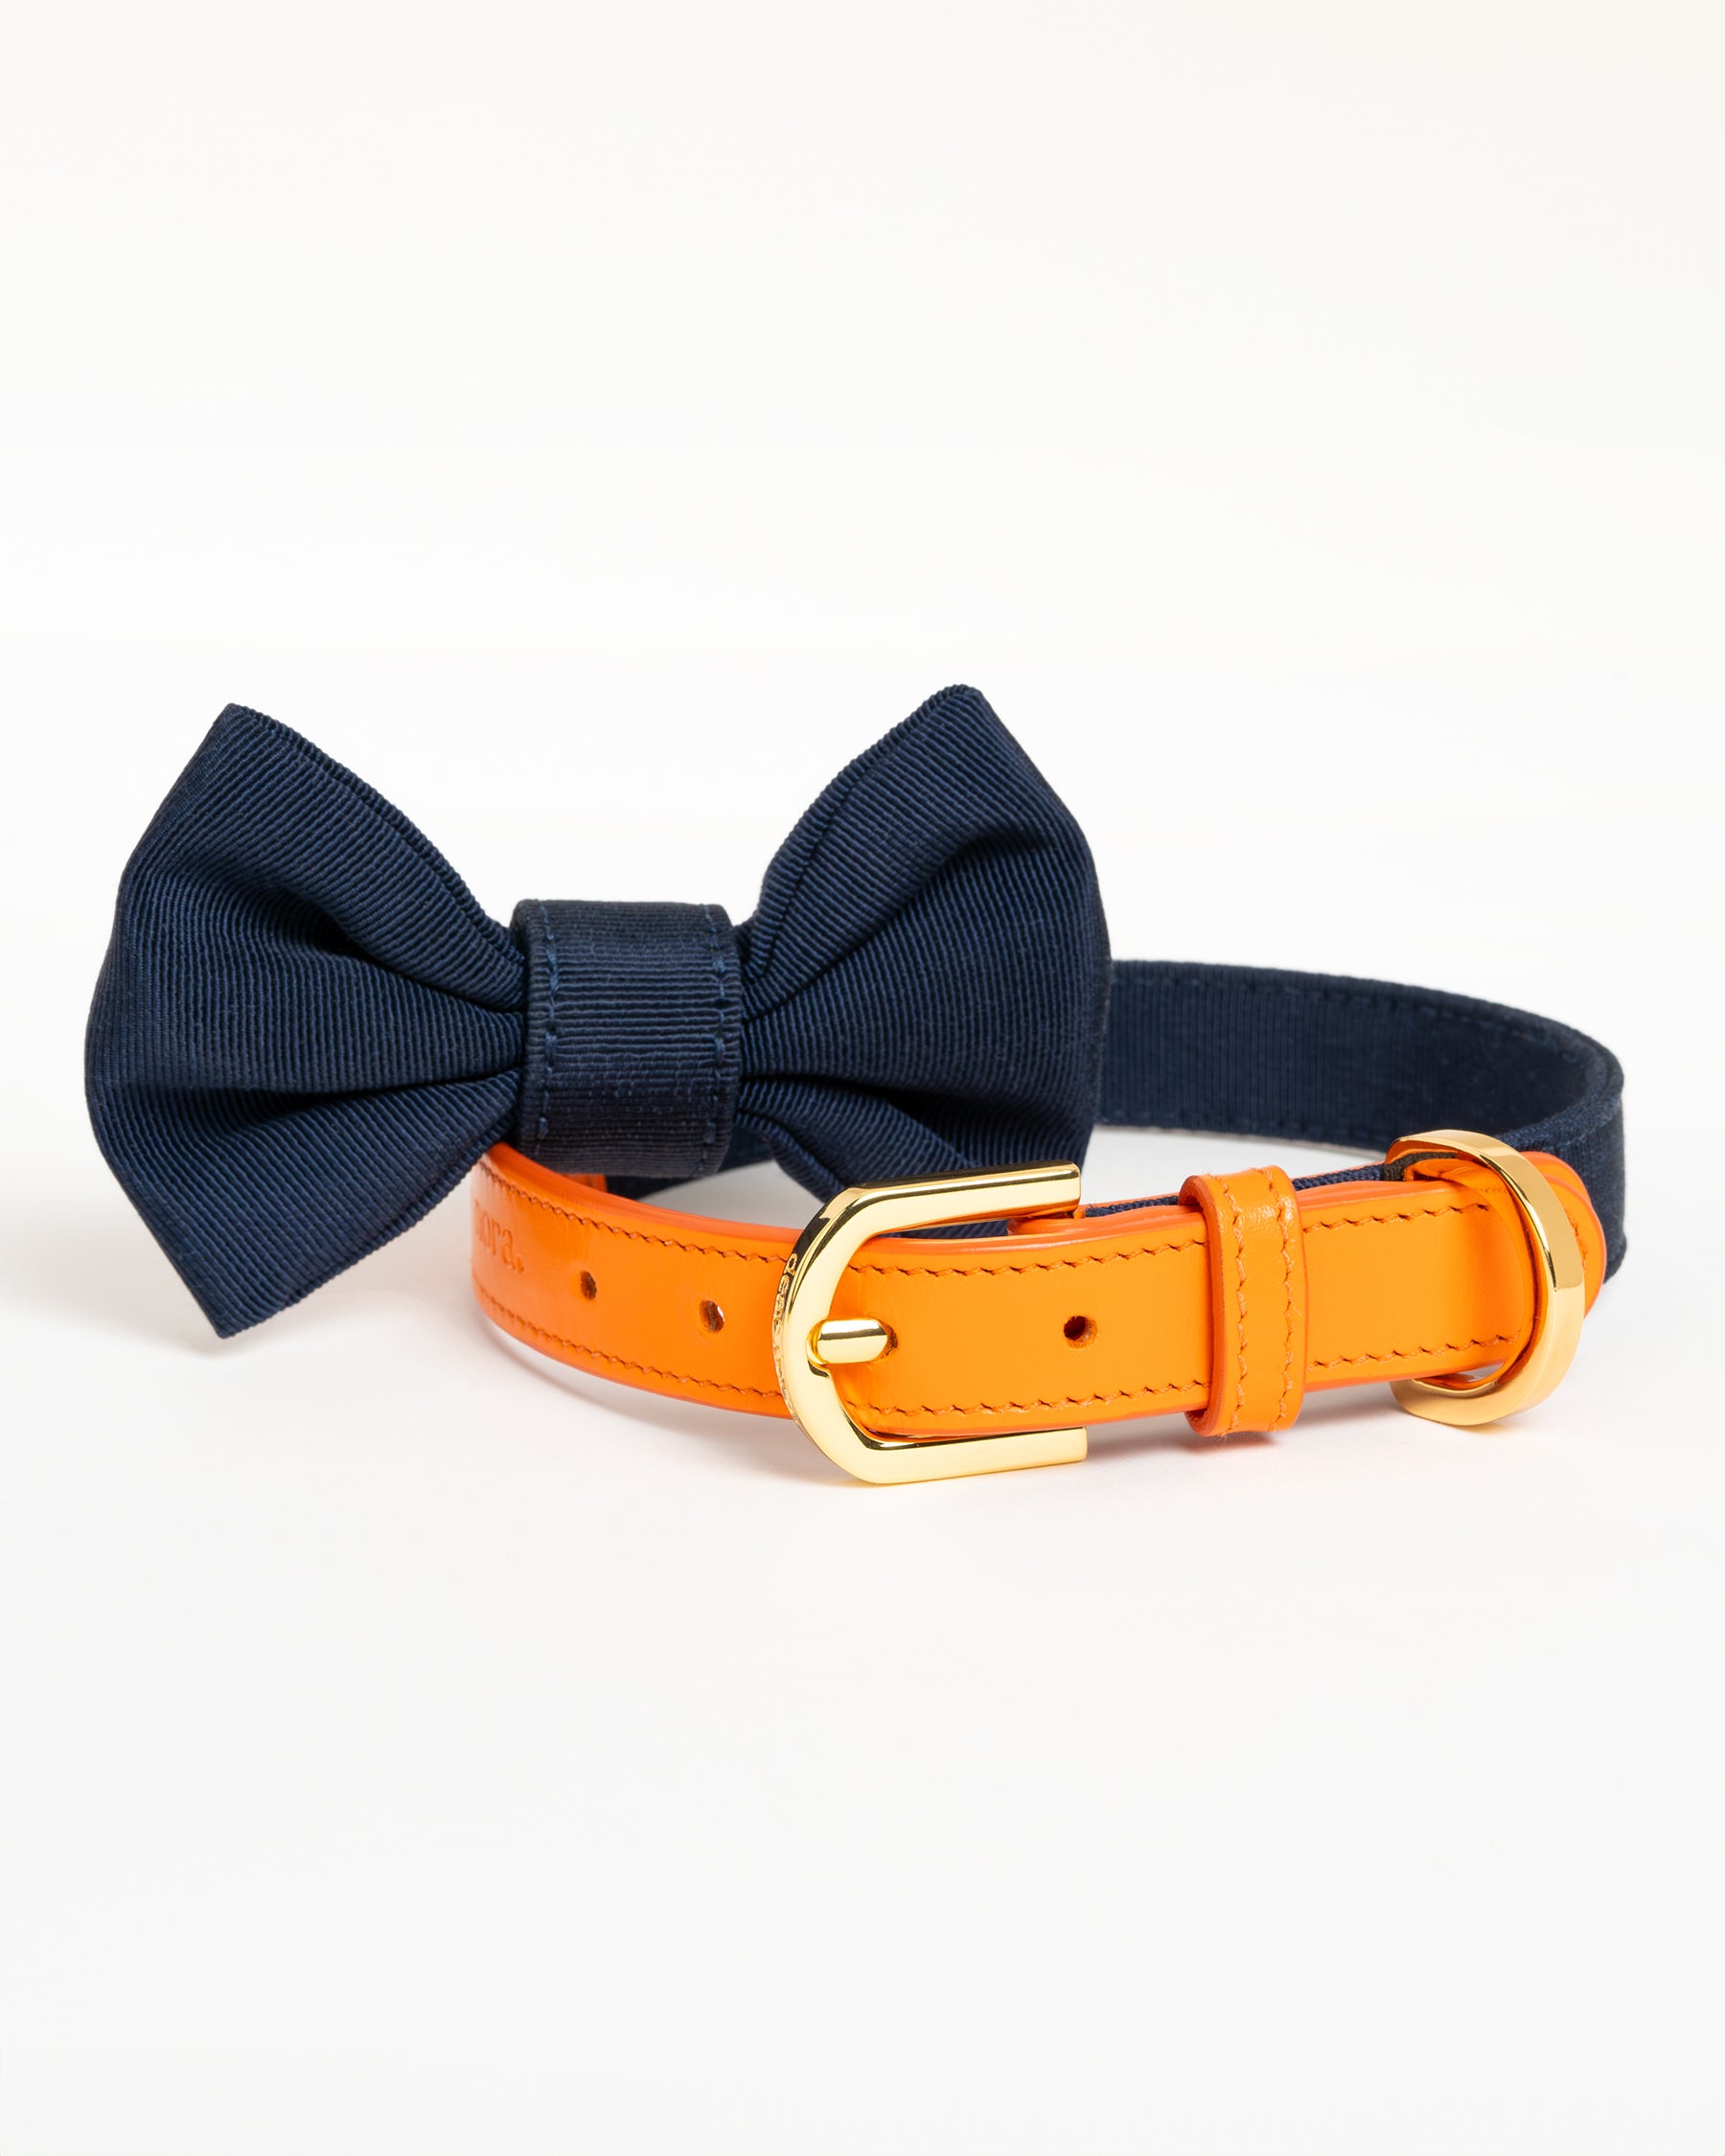 Dear Nora Tangerine dog collar and bow - orange leather, navy blue fabric and 24k plated hardware - front shot